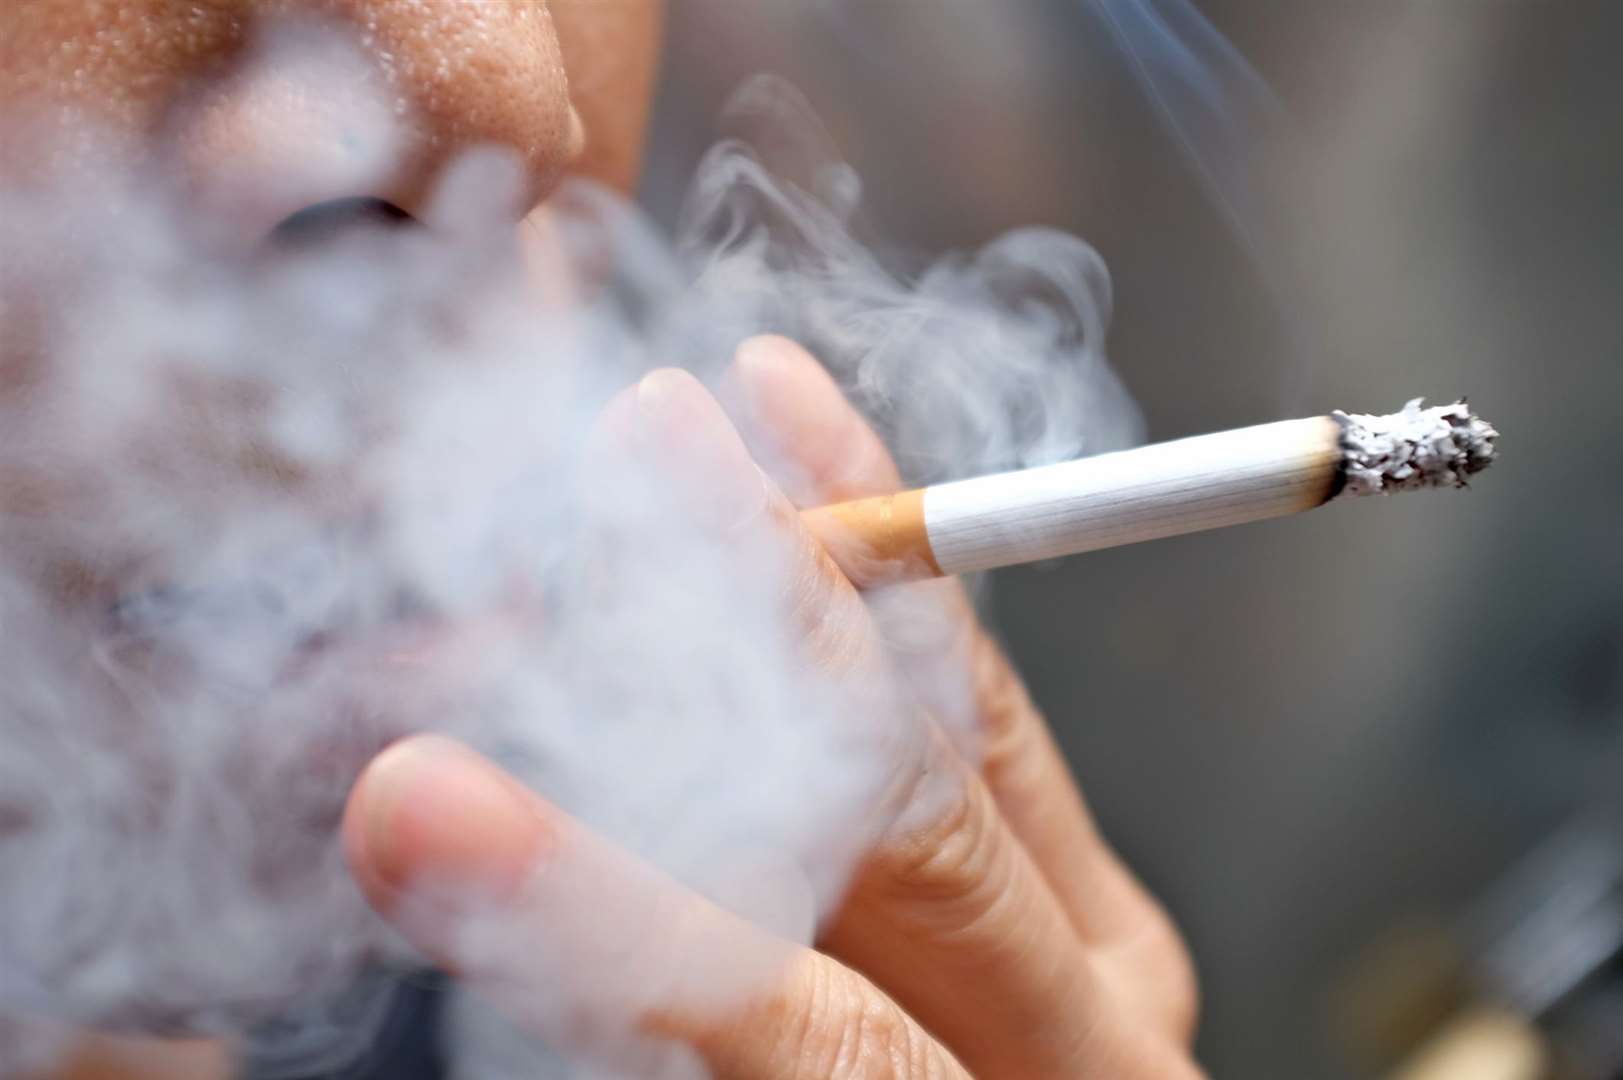 There are plans to gradually outlaw smoking. Picture: istock/Zang Rhong